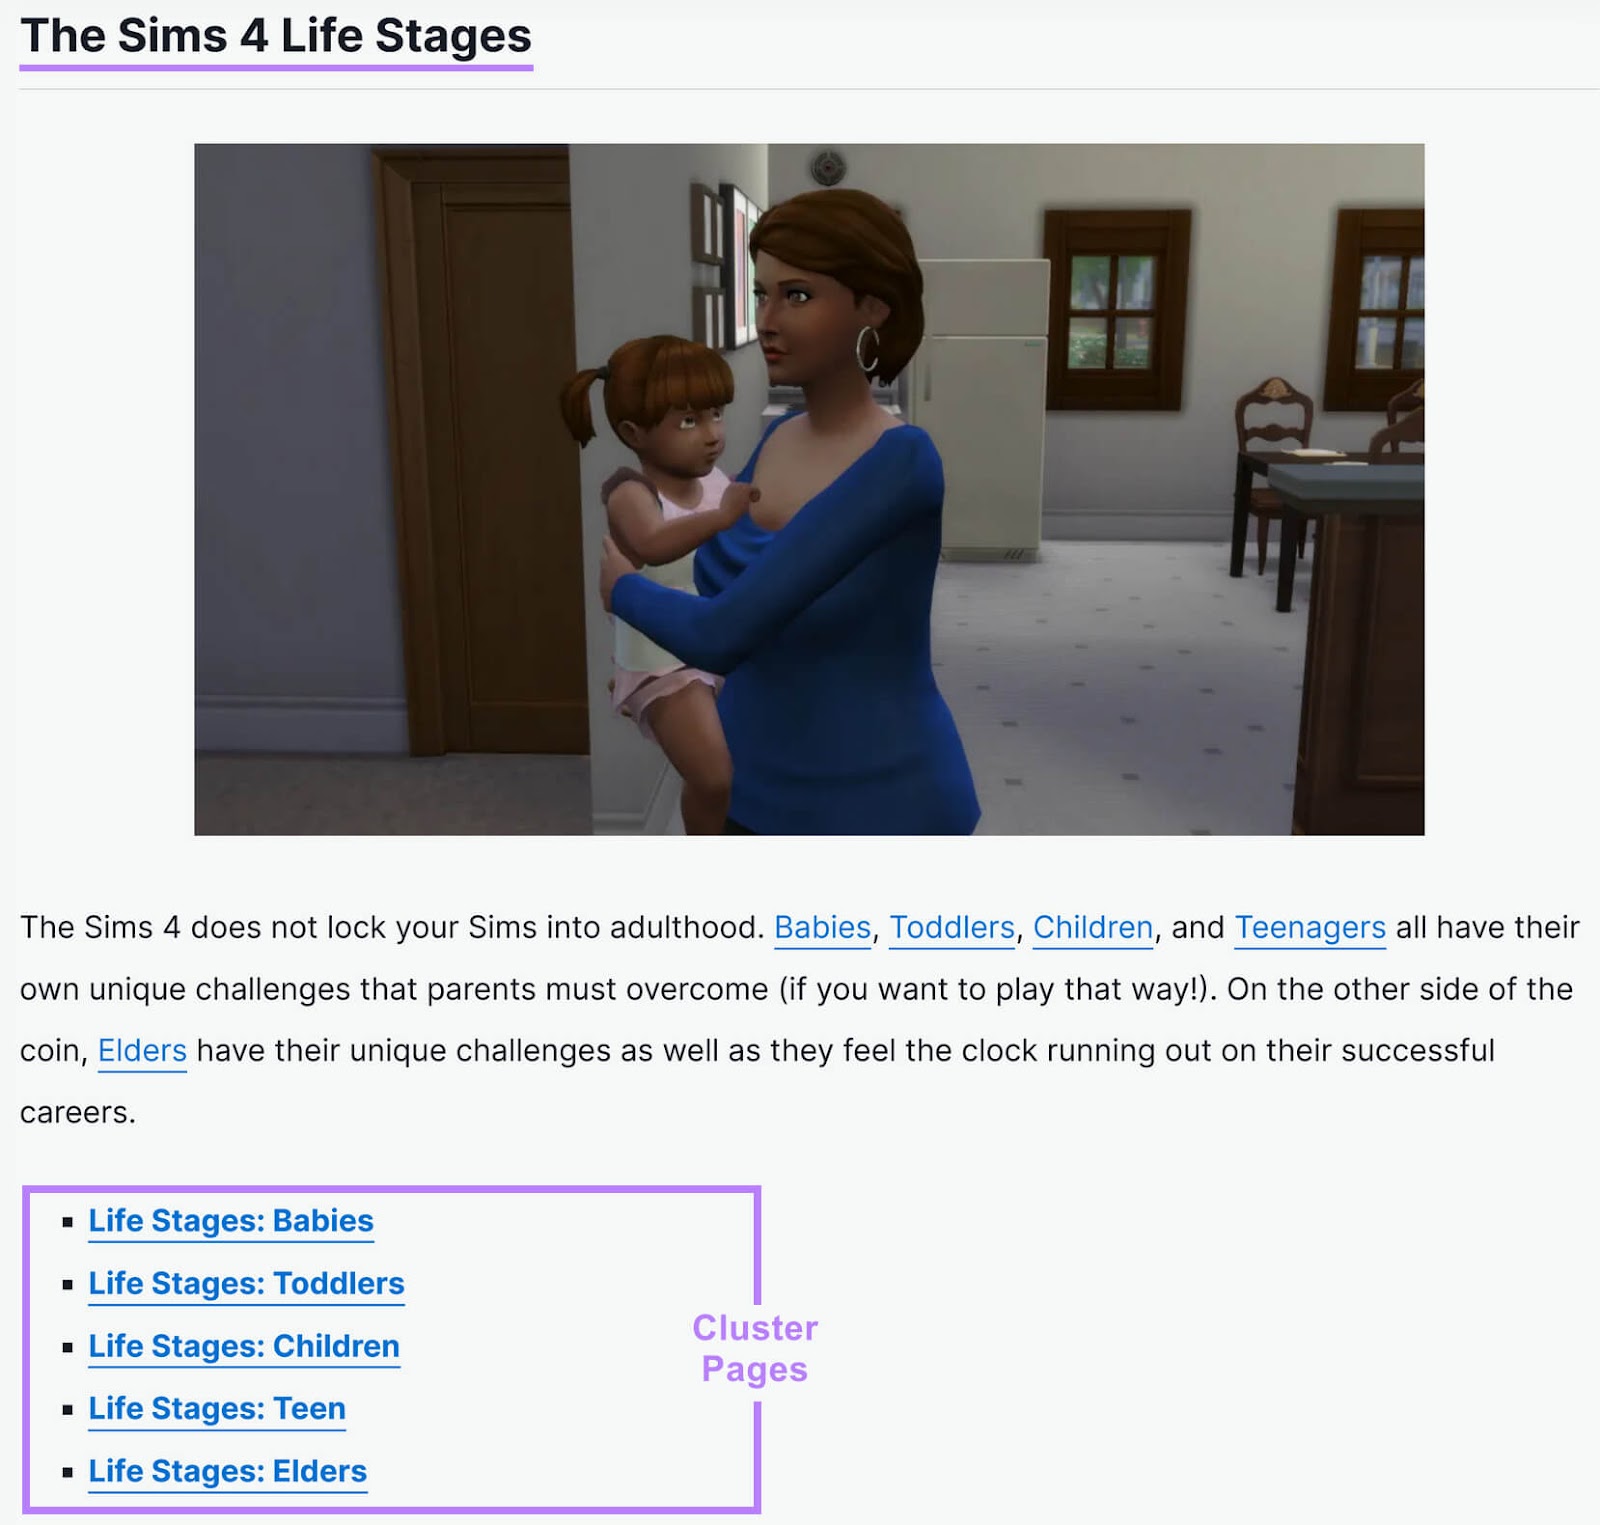 Section of the guide for "The Sims 4" game featuring an image, a paragraph, and 5 links annotated as "Cluster Pages."